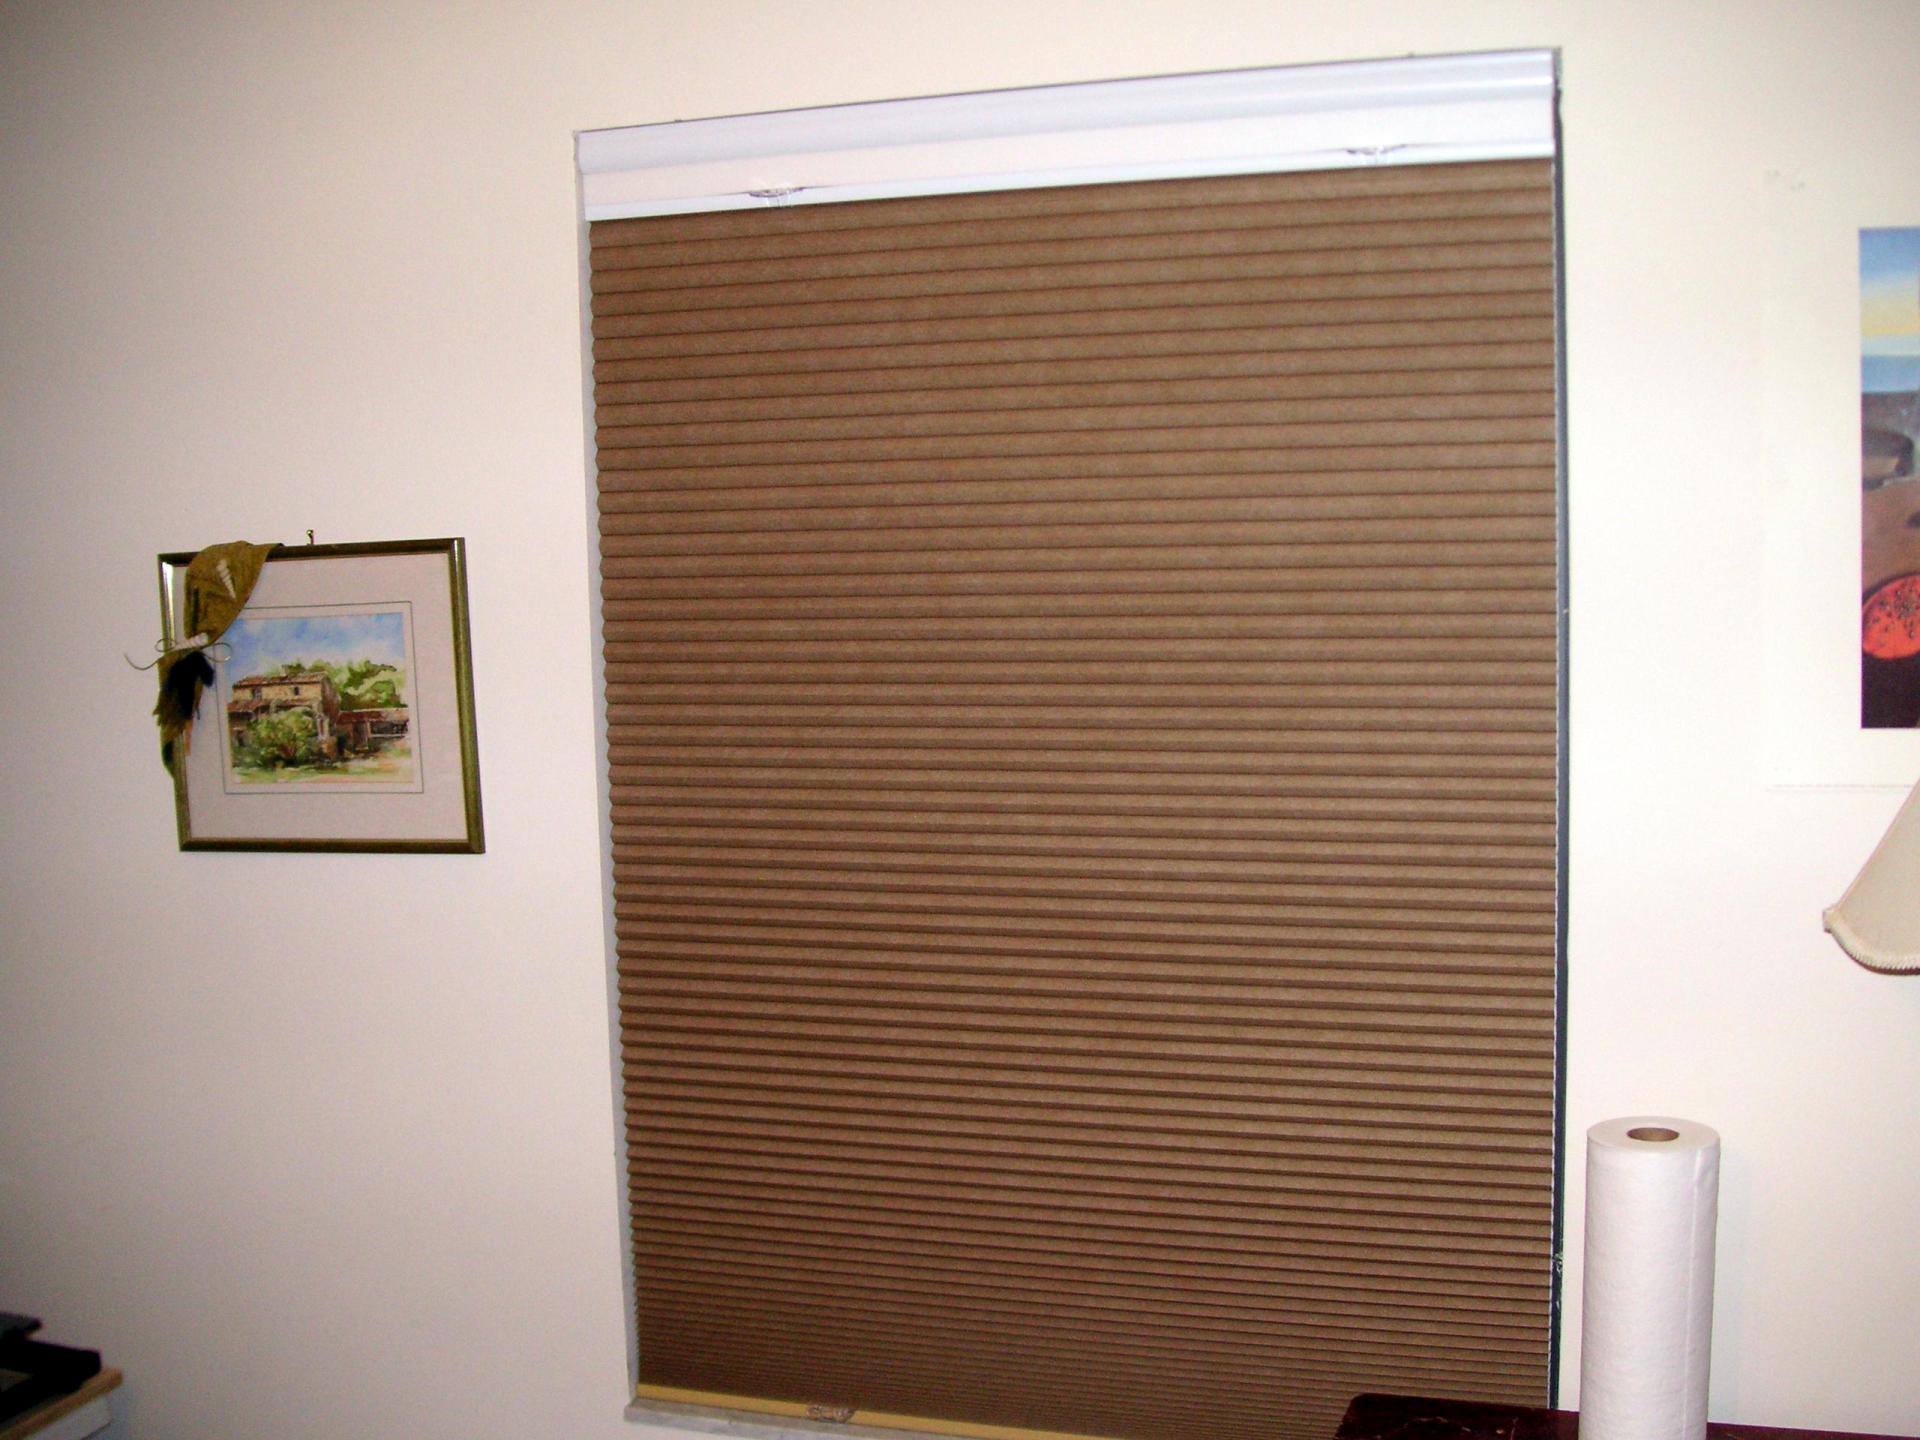 2022-03-12_Bali-blinds-review_05